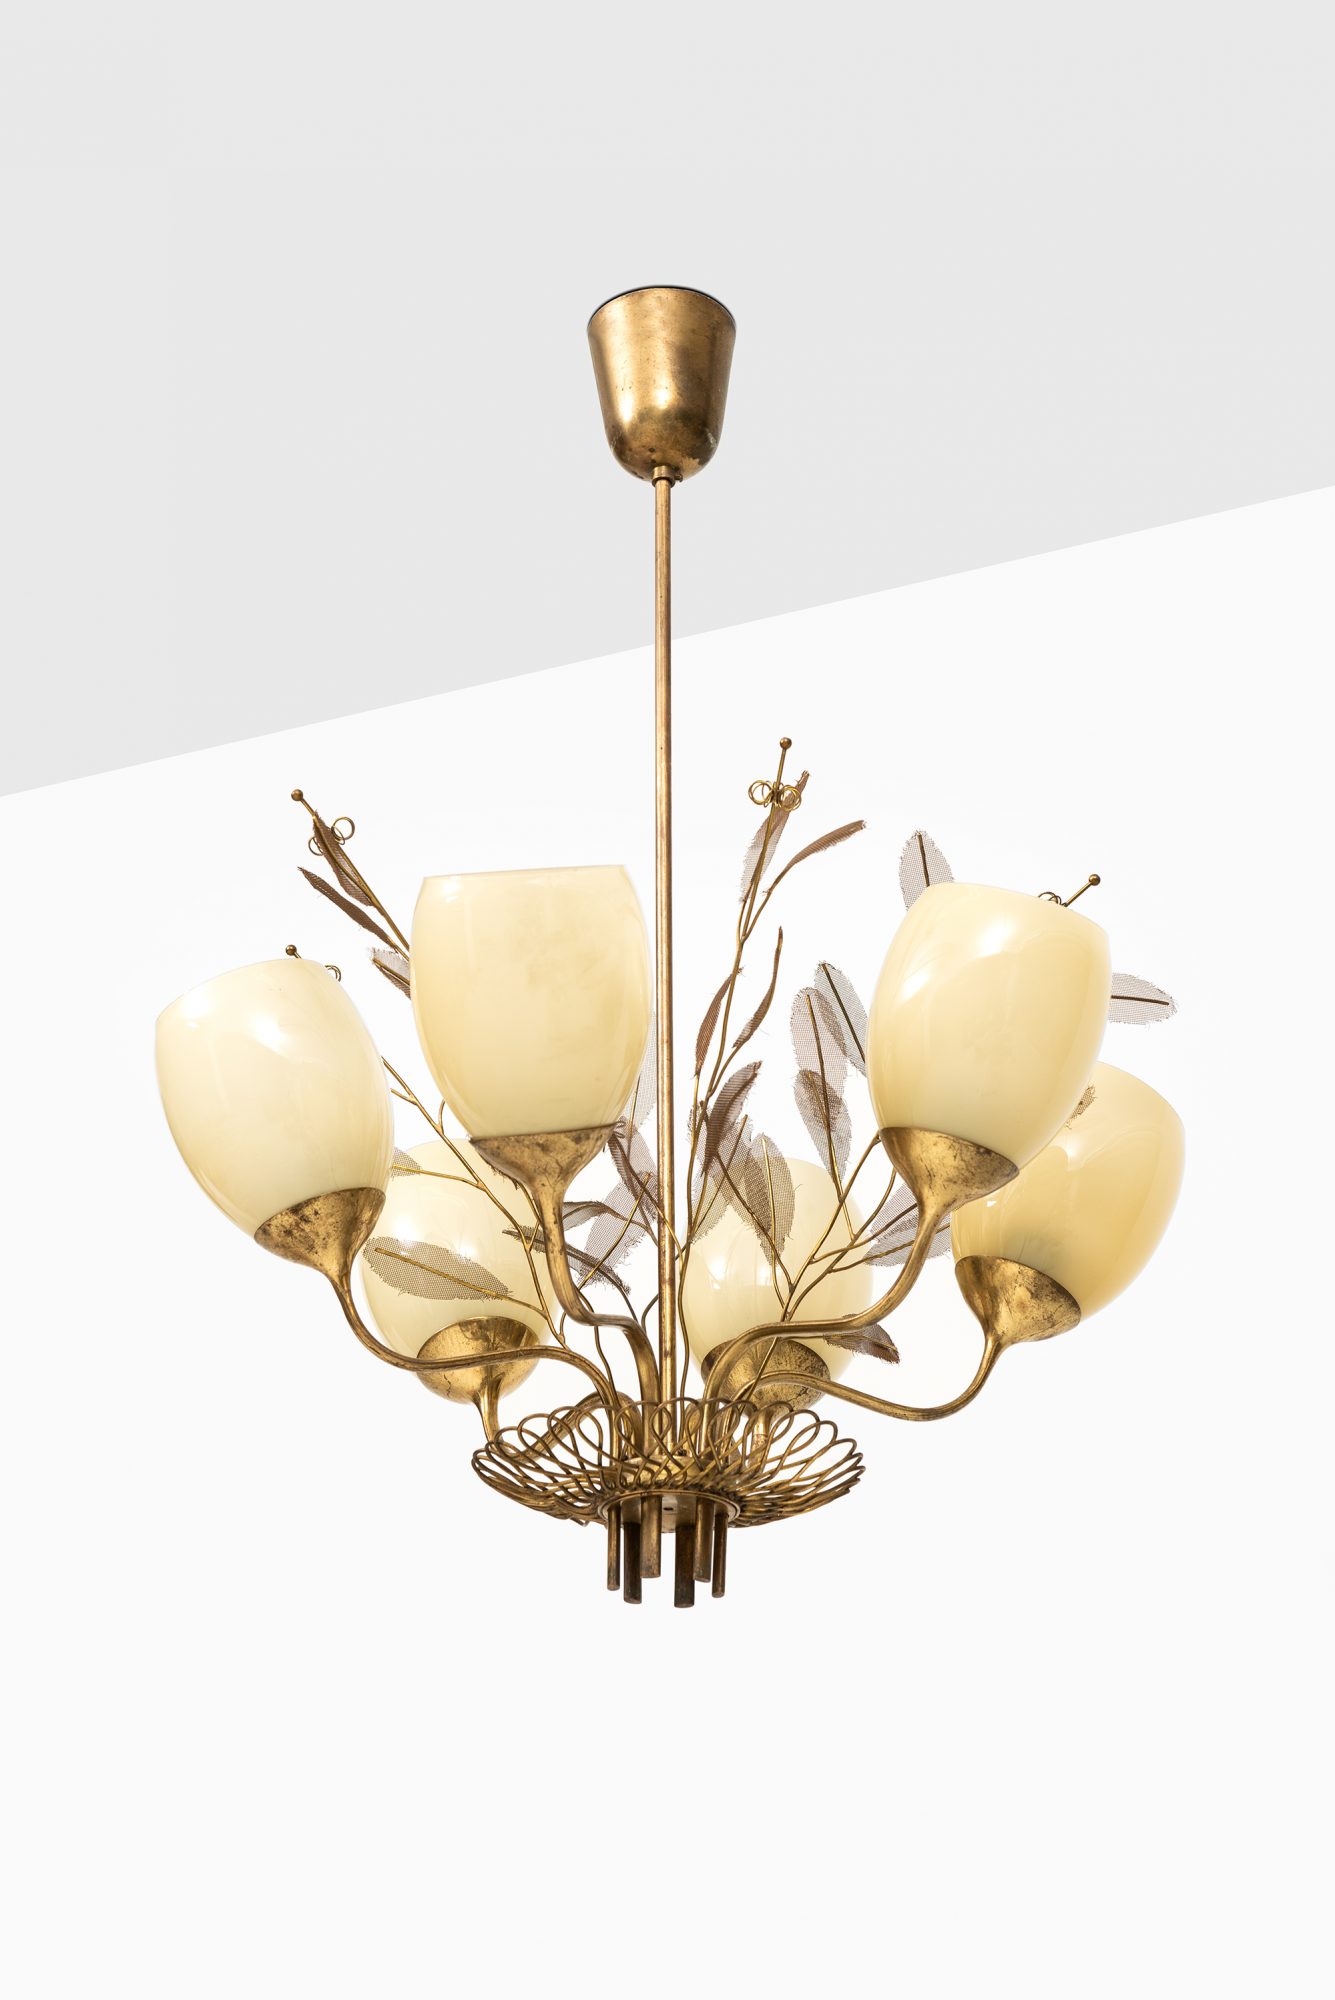 Paavo Tynell ceiling lamp model 9029/6 by Taito Oy at Studio Schalling